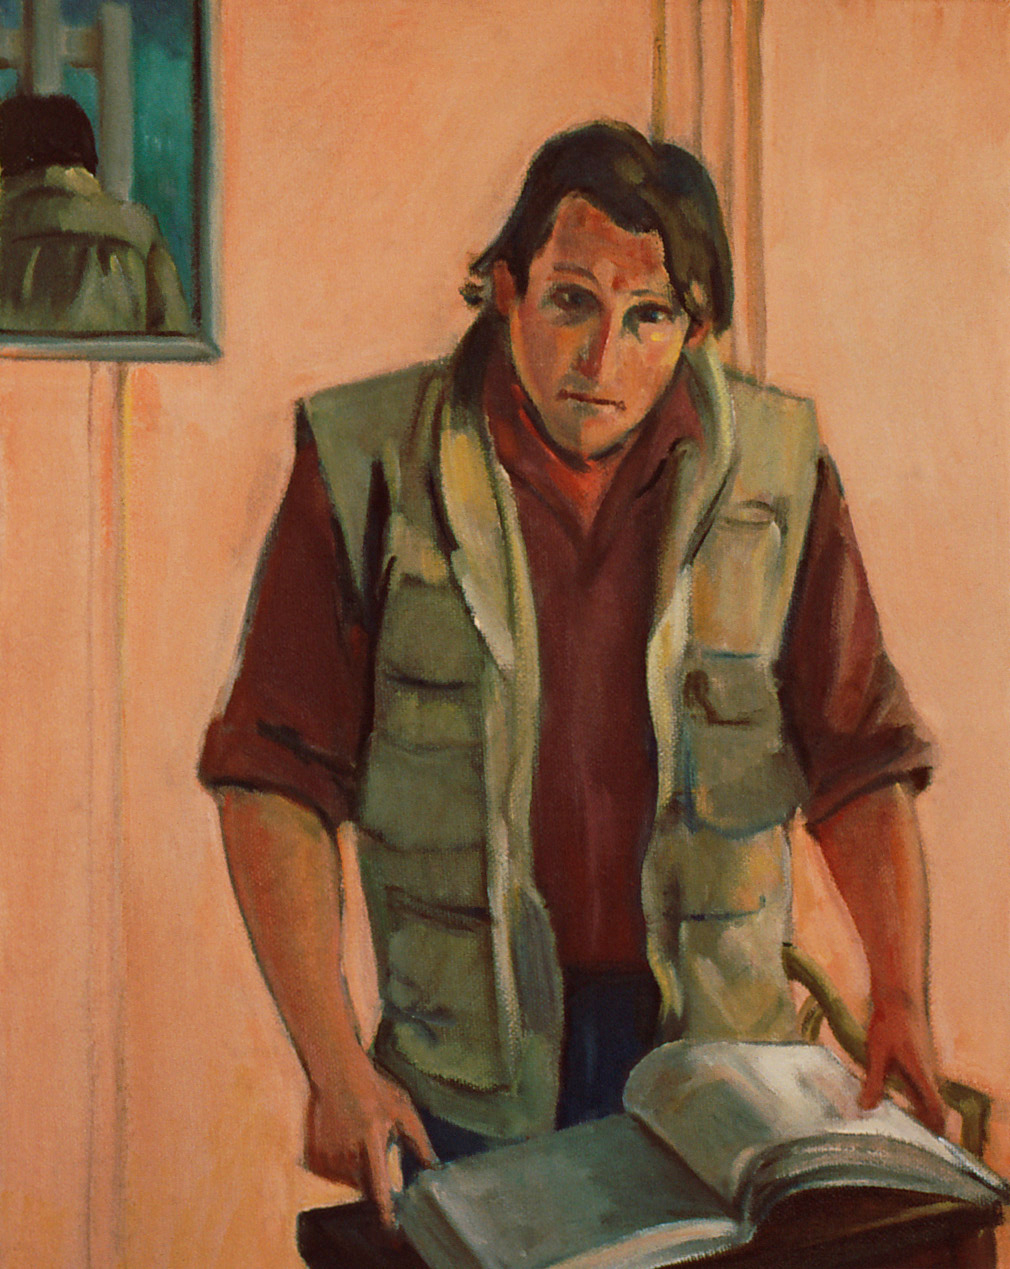 Thumbnail of Michael Wingo reading: by Ethel Fisher, 1988, oil on canvas, 14 x 11 inches